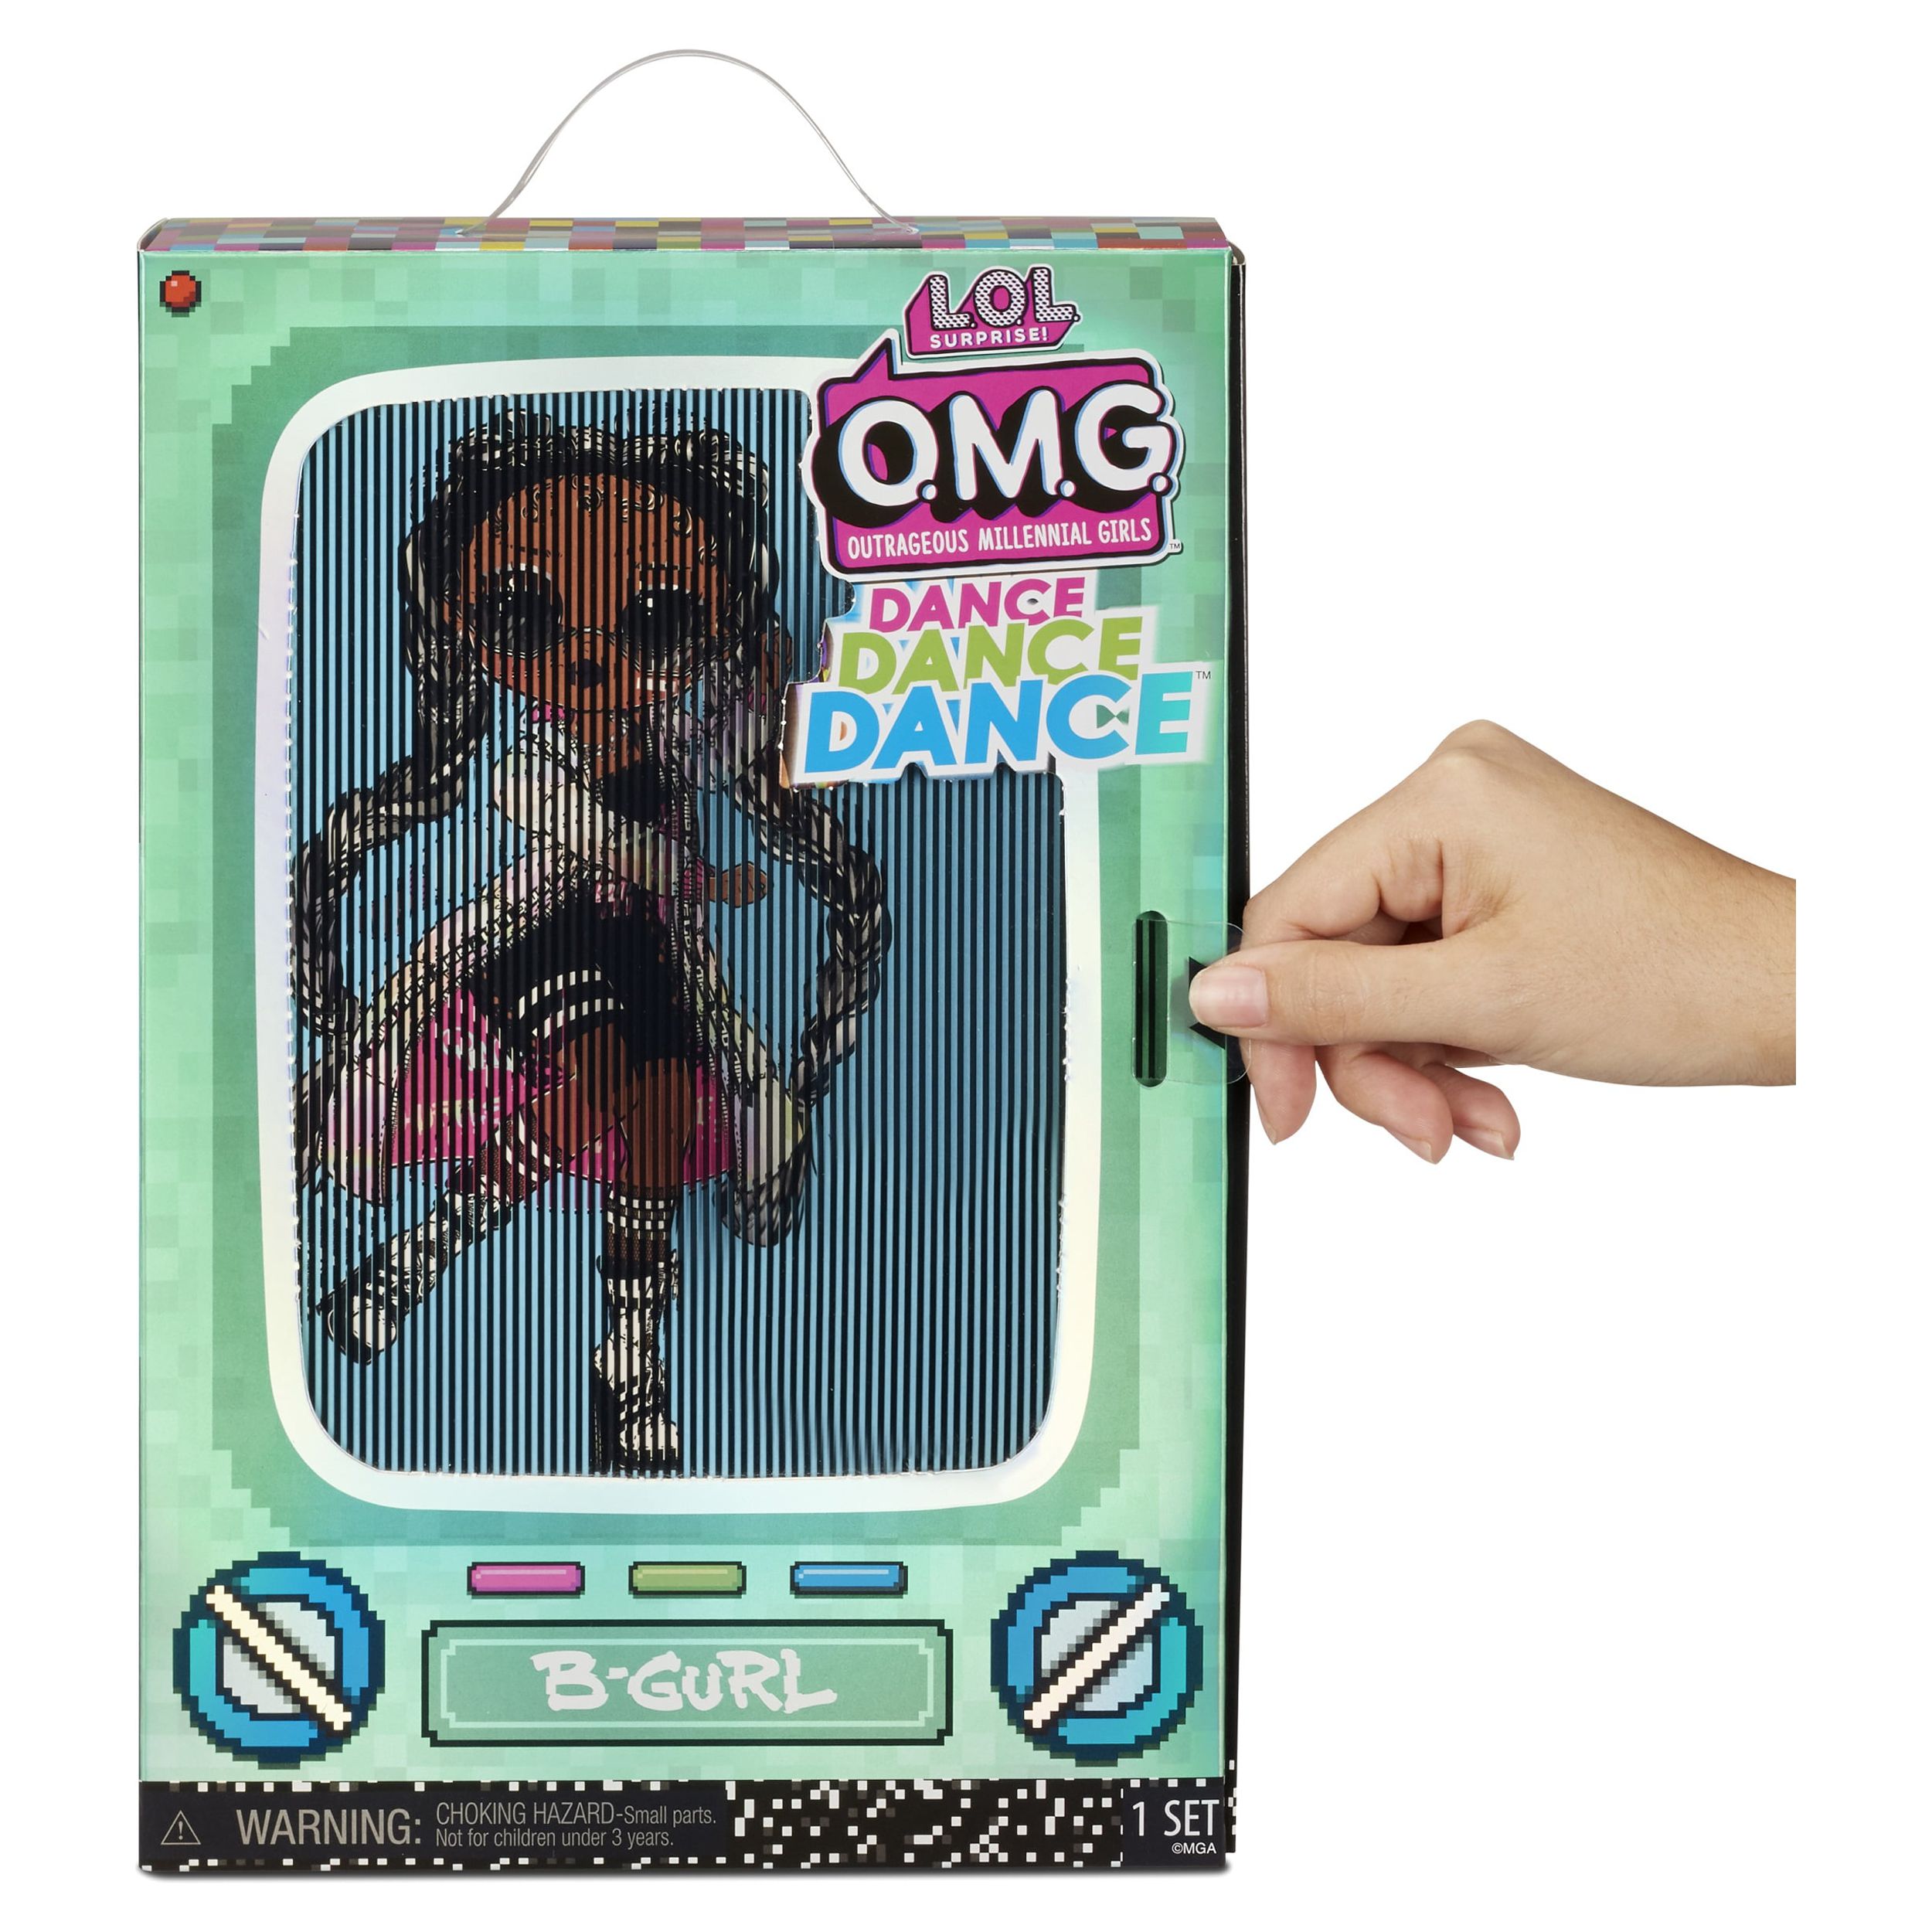 LOL Surprise OMG Dance Dance Dance B-Gurl Fashion Doll With 15 Surprises Including Magic Blacklight, Shoes, Hair Brush, Doll Stand and TV Package - For Girls Ages 4+ - image 6 of 7